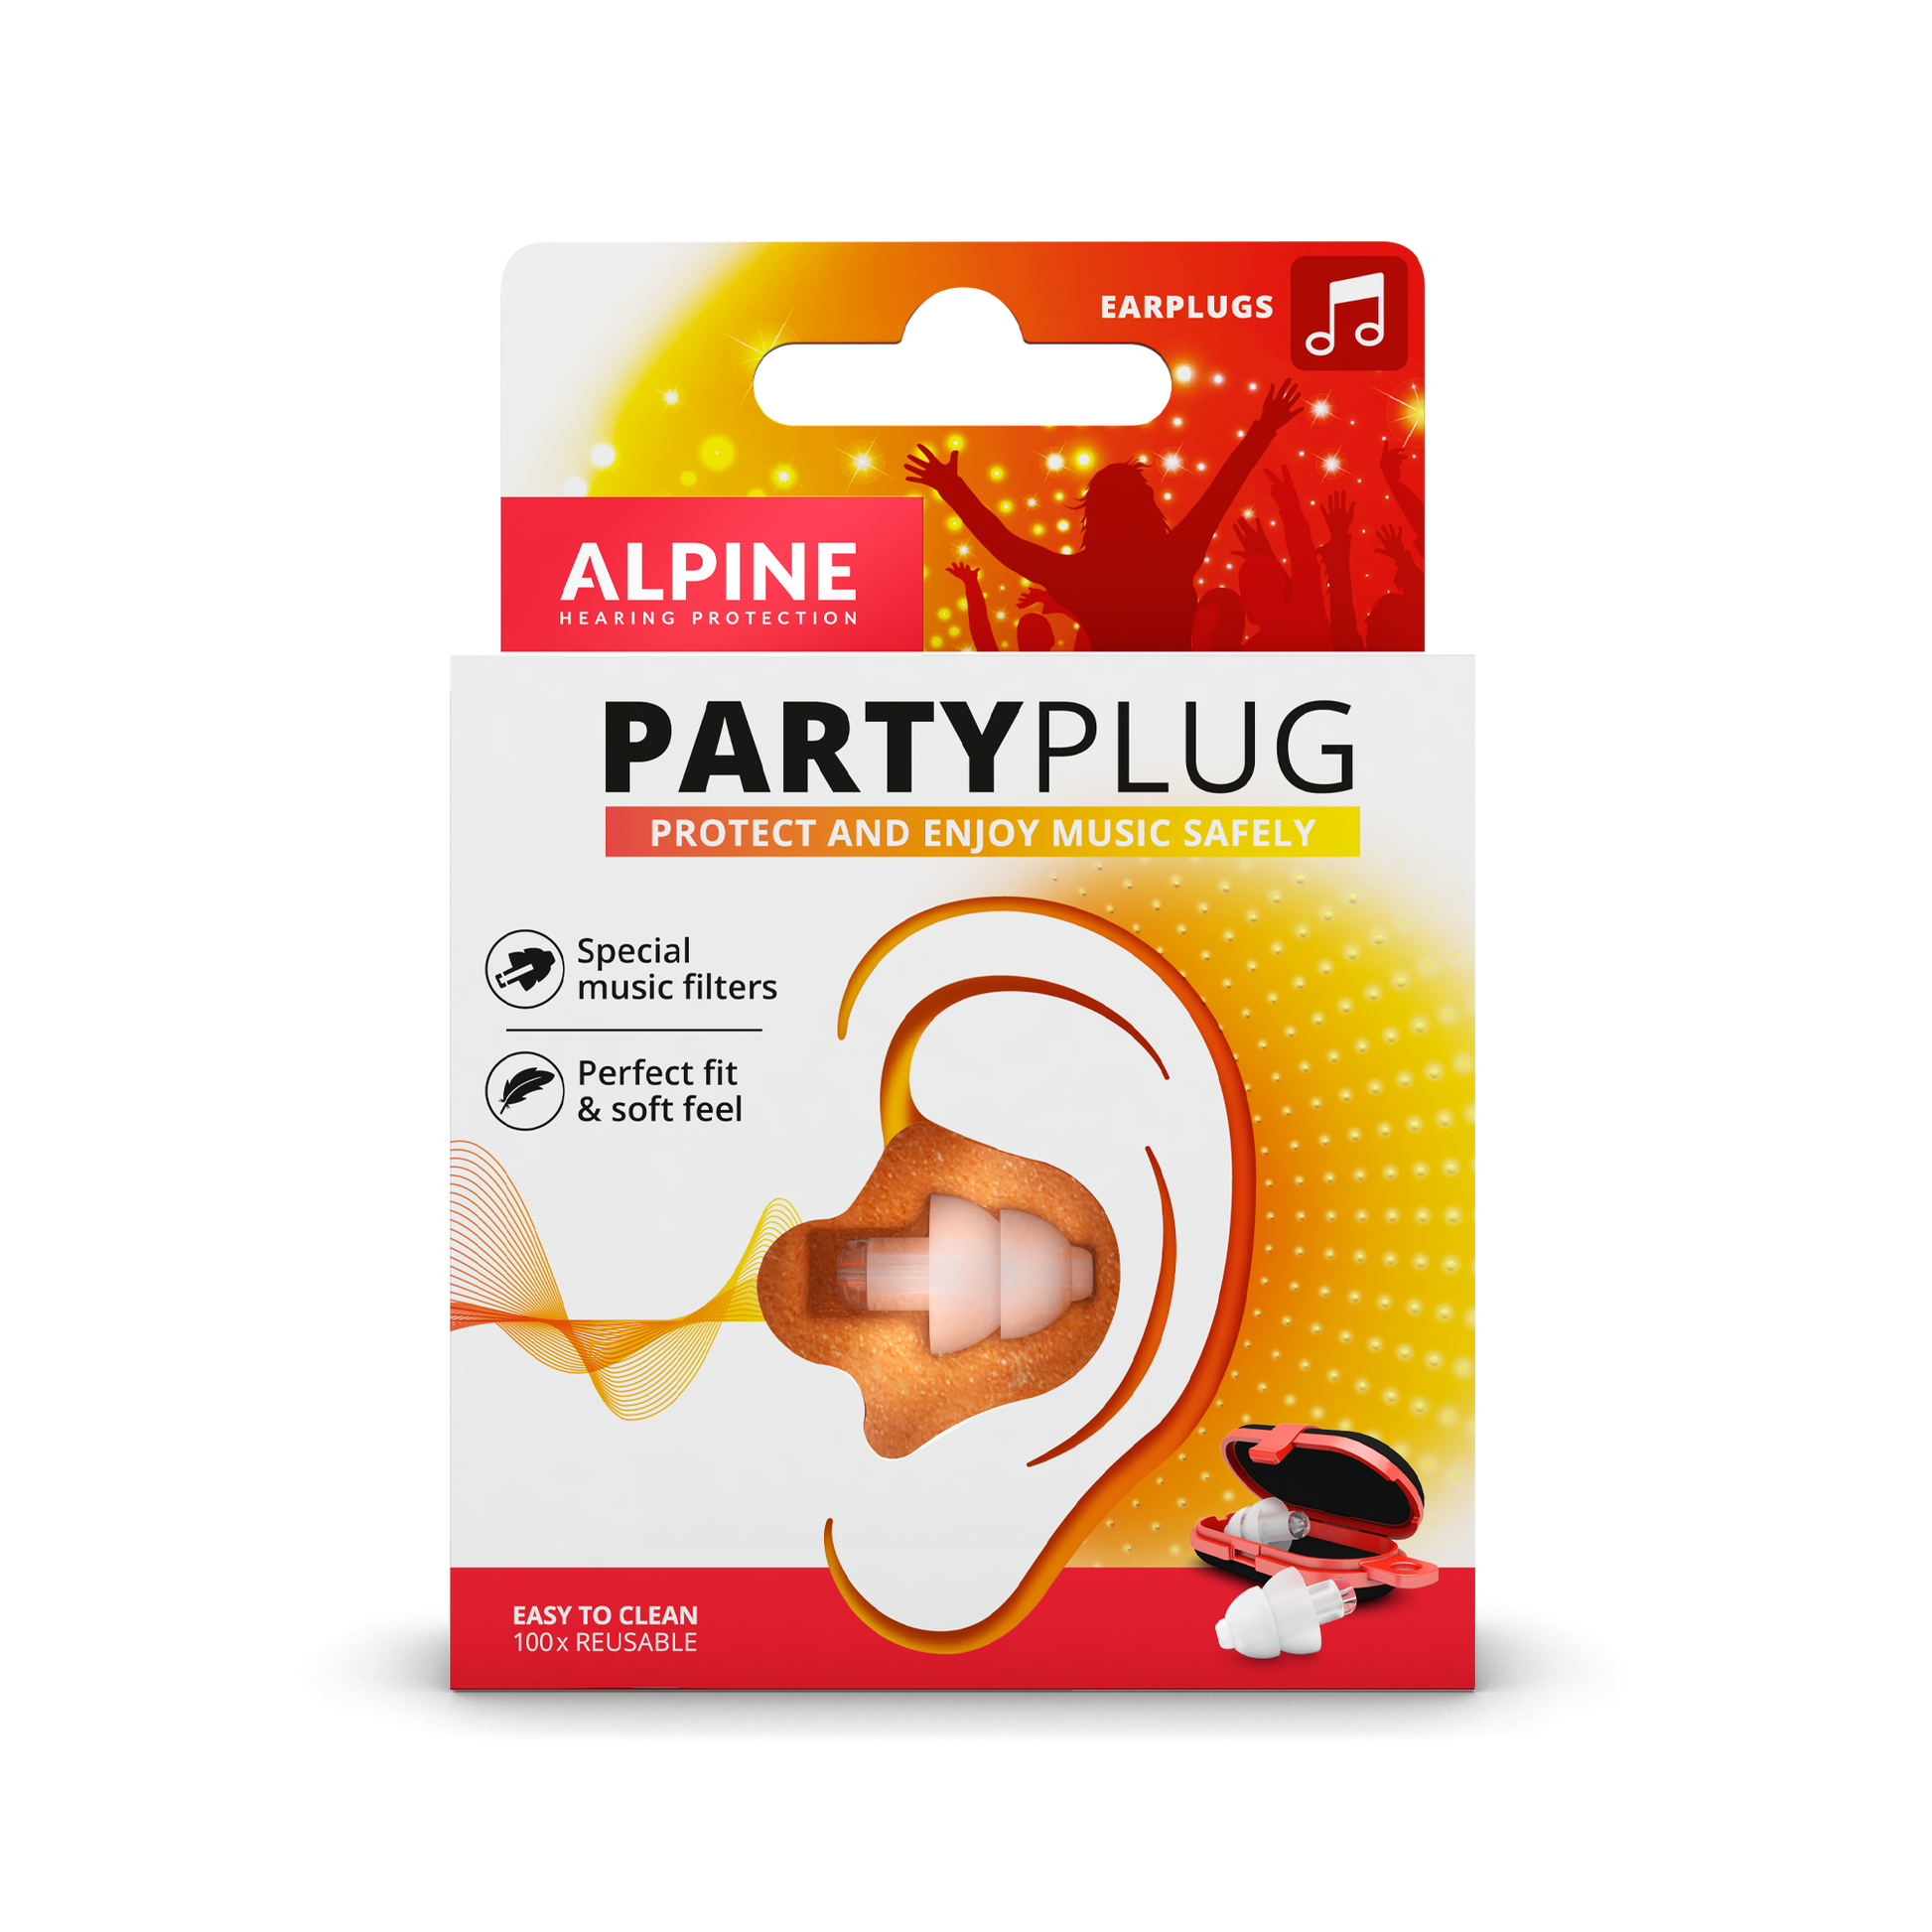 Alpine PartyPlugs to protect your ears during music Alpine hearing protection Earplugs earmuffs protect your ear red dot award party concert festival partyplug MusicSafe MusicSafe Earmuff MusicSafe Pro packaging white